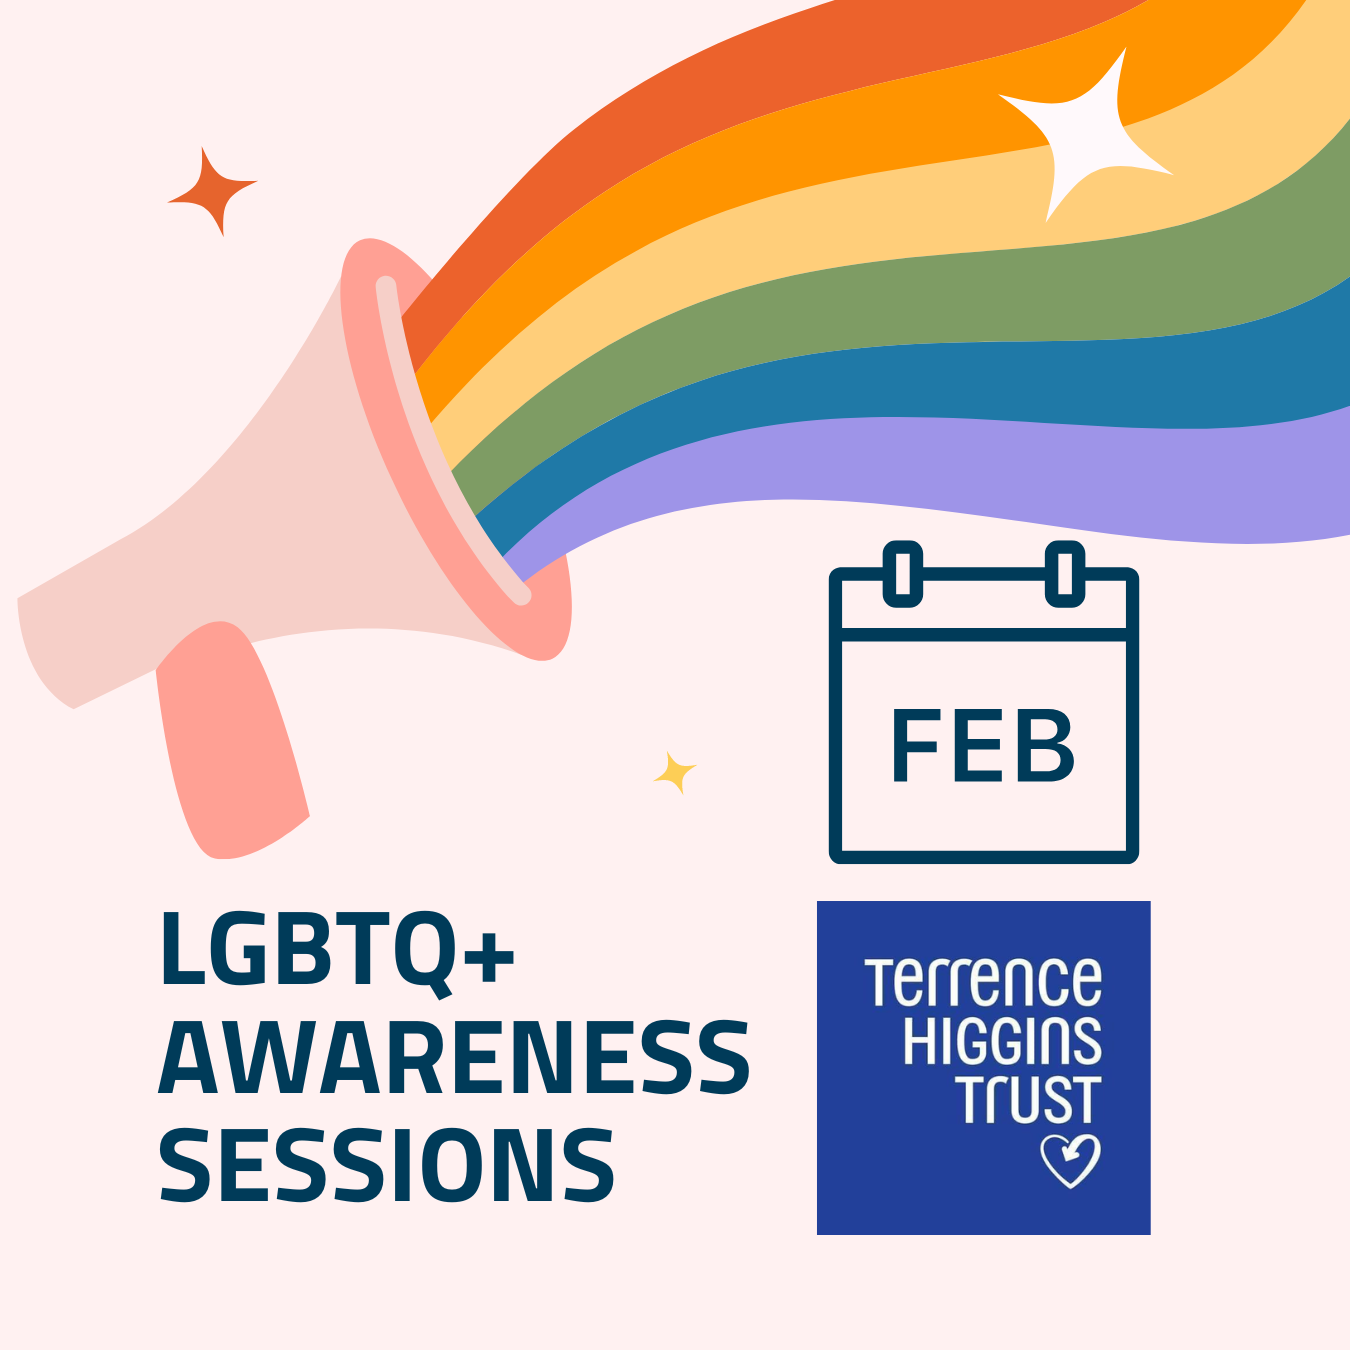 Decorative megaphone with rainbow for LGBTQ+ Awareness Sessions